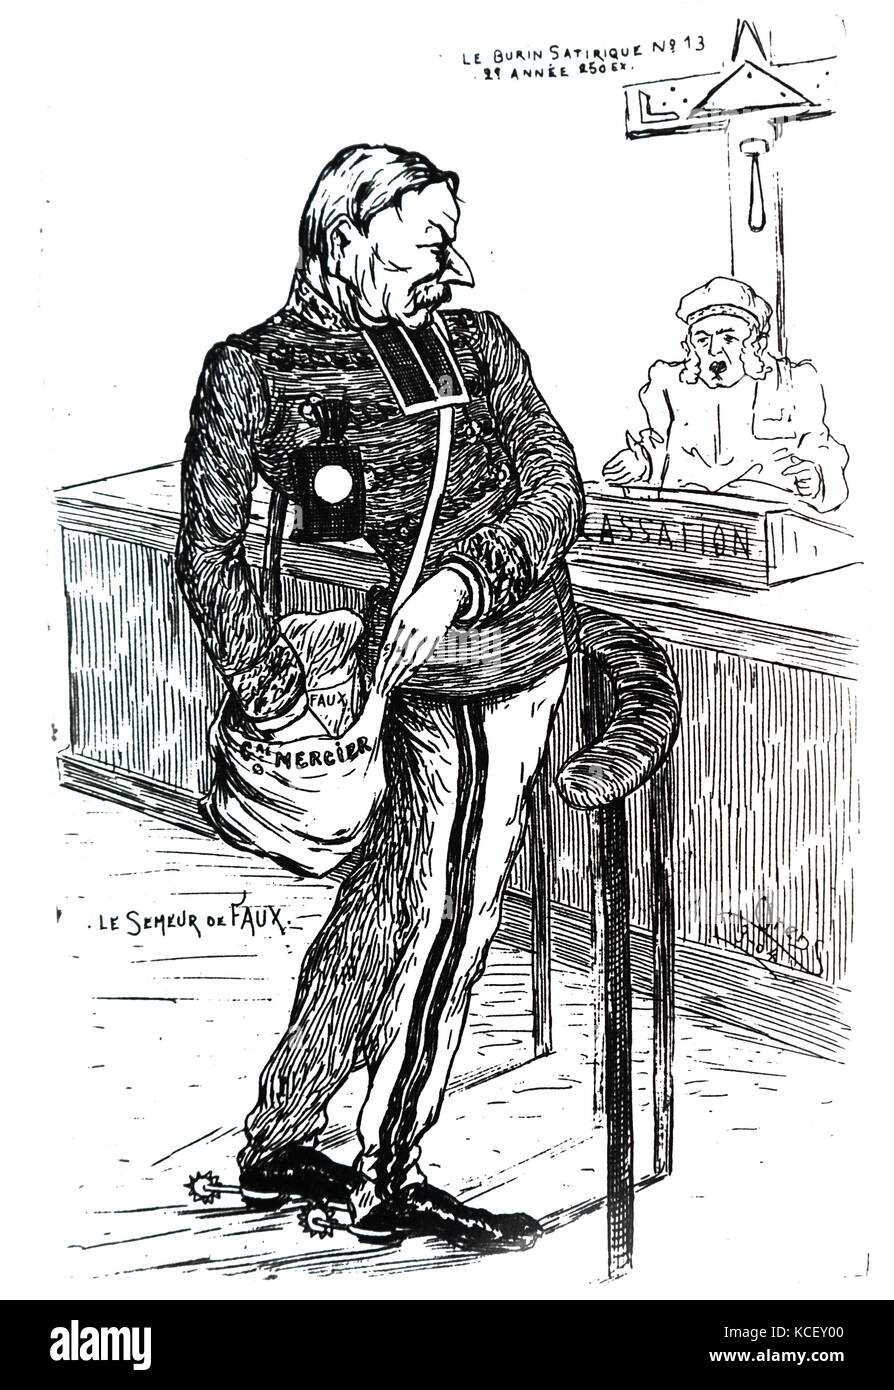 Cartoon depicting Auguste Mercier (1833 – 1921) . Mercier was a French general and Minister of War at the time of the Dreyfus Affair. In March 1904, before the Criminal Chamber of the Supreme Court, Mercier again accused Dreyfus. On the eve of the judgment without reference by the Supreme Court, he was unable to provide any 'irrefutable' evidence despite the pleas of the anti-Semitic press and the nationalists. Dated 20th Century Stock Photo